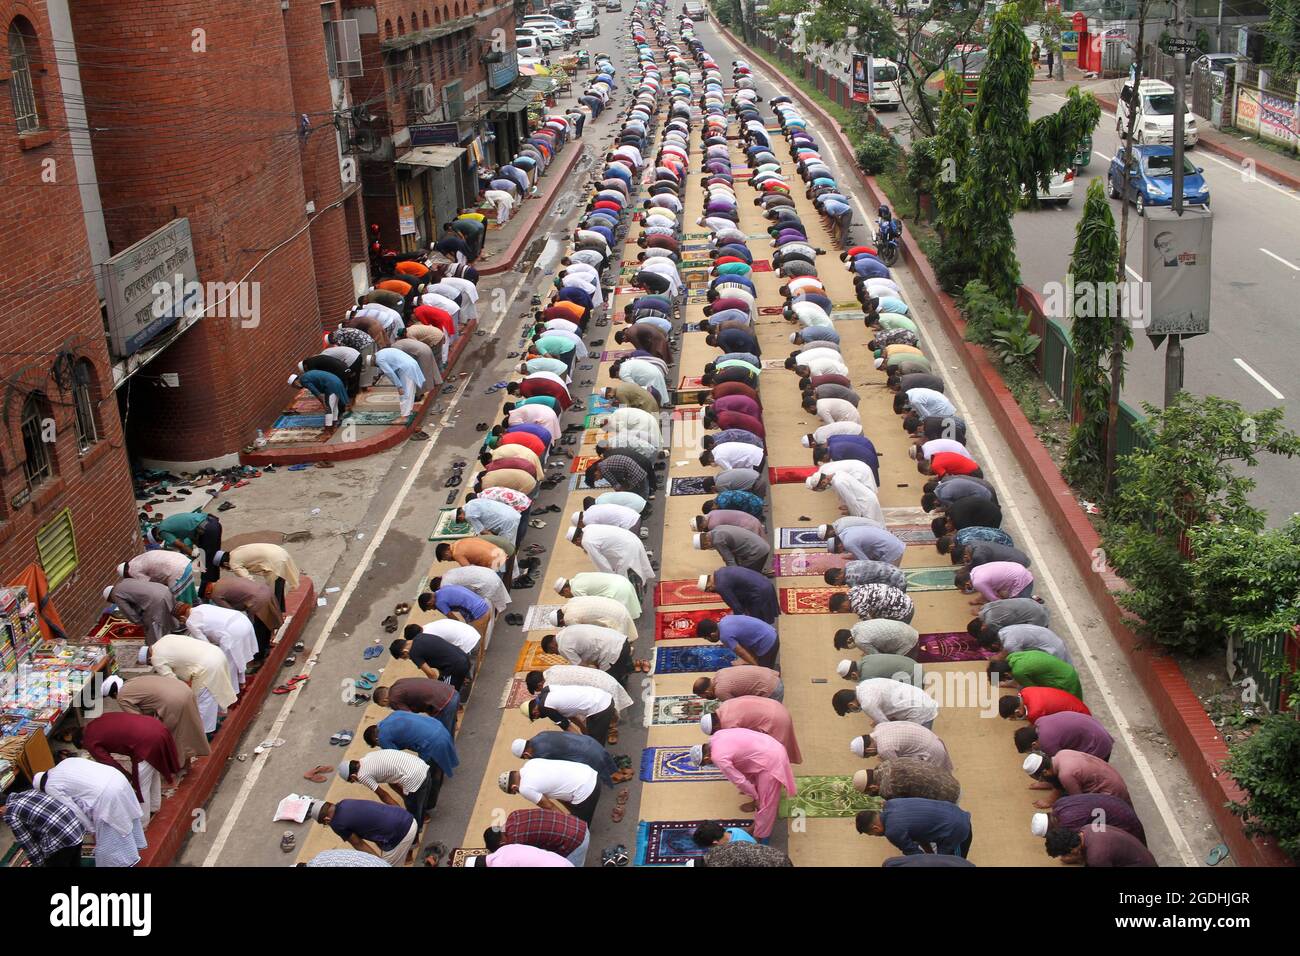 Dhaka, Bangladesh. 13th Aug, 2021. Aerial view of thousands of Muslims meeting take part during a mass Jummah Prayer, Due this Islamic ritual is mandatory act, it is performed every Friday to fulfill its obligations as a faithful. Jummah is the holiest day of the week on which special congregational prayers are offered. Fridays are considered a celebration in their own right and Muslims take special care in wearing clean clothes, bathing, and preparing special meals on this day. (Photo by Eyepix Group/Pacific Press) Credit: Pacific Press Media Production Corp./Alamy Live News Stock Photo